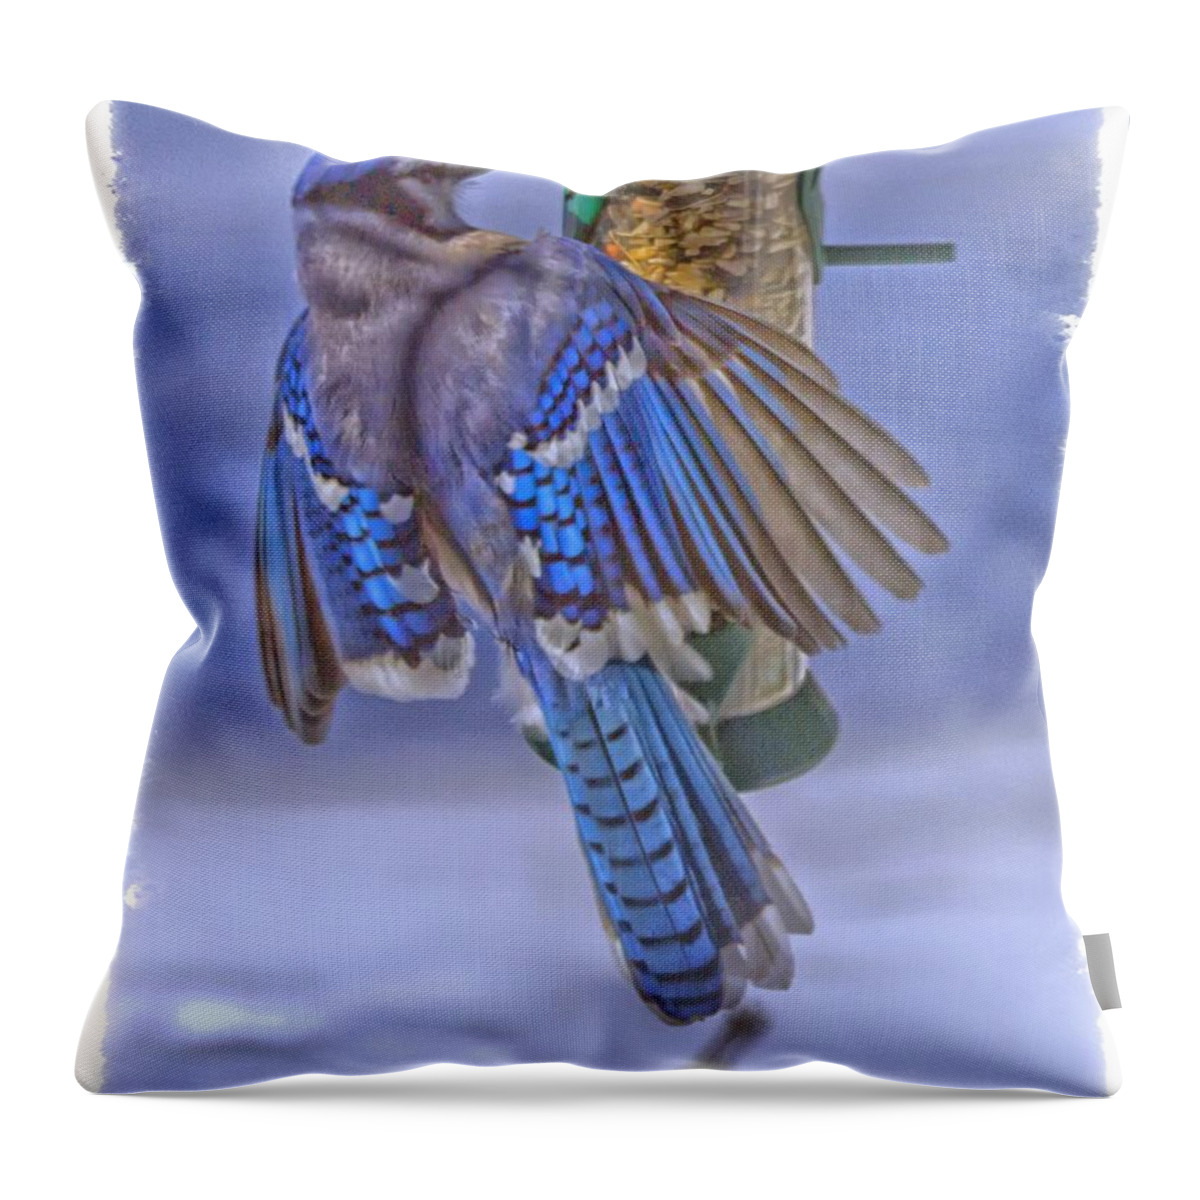 Blue Jay Throw Pillow featuring the photograph Blue Jay Swinging by Constantine Gregory